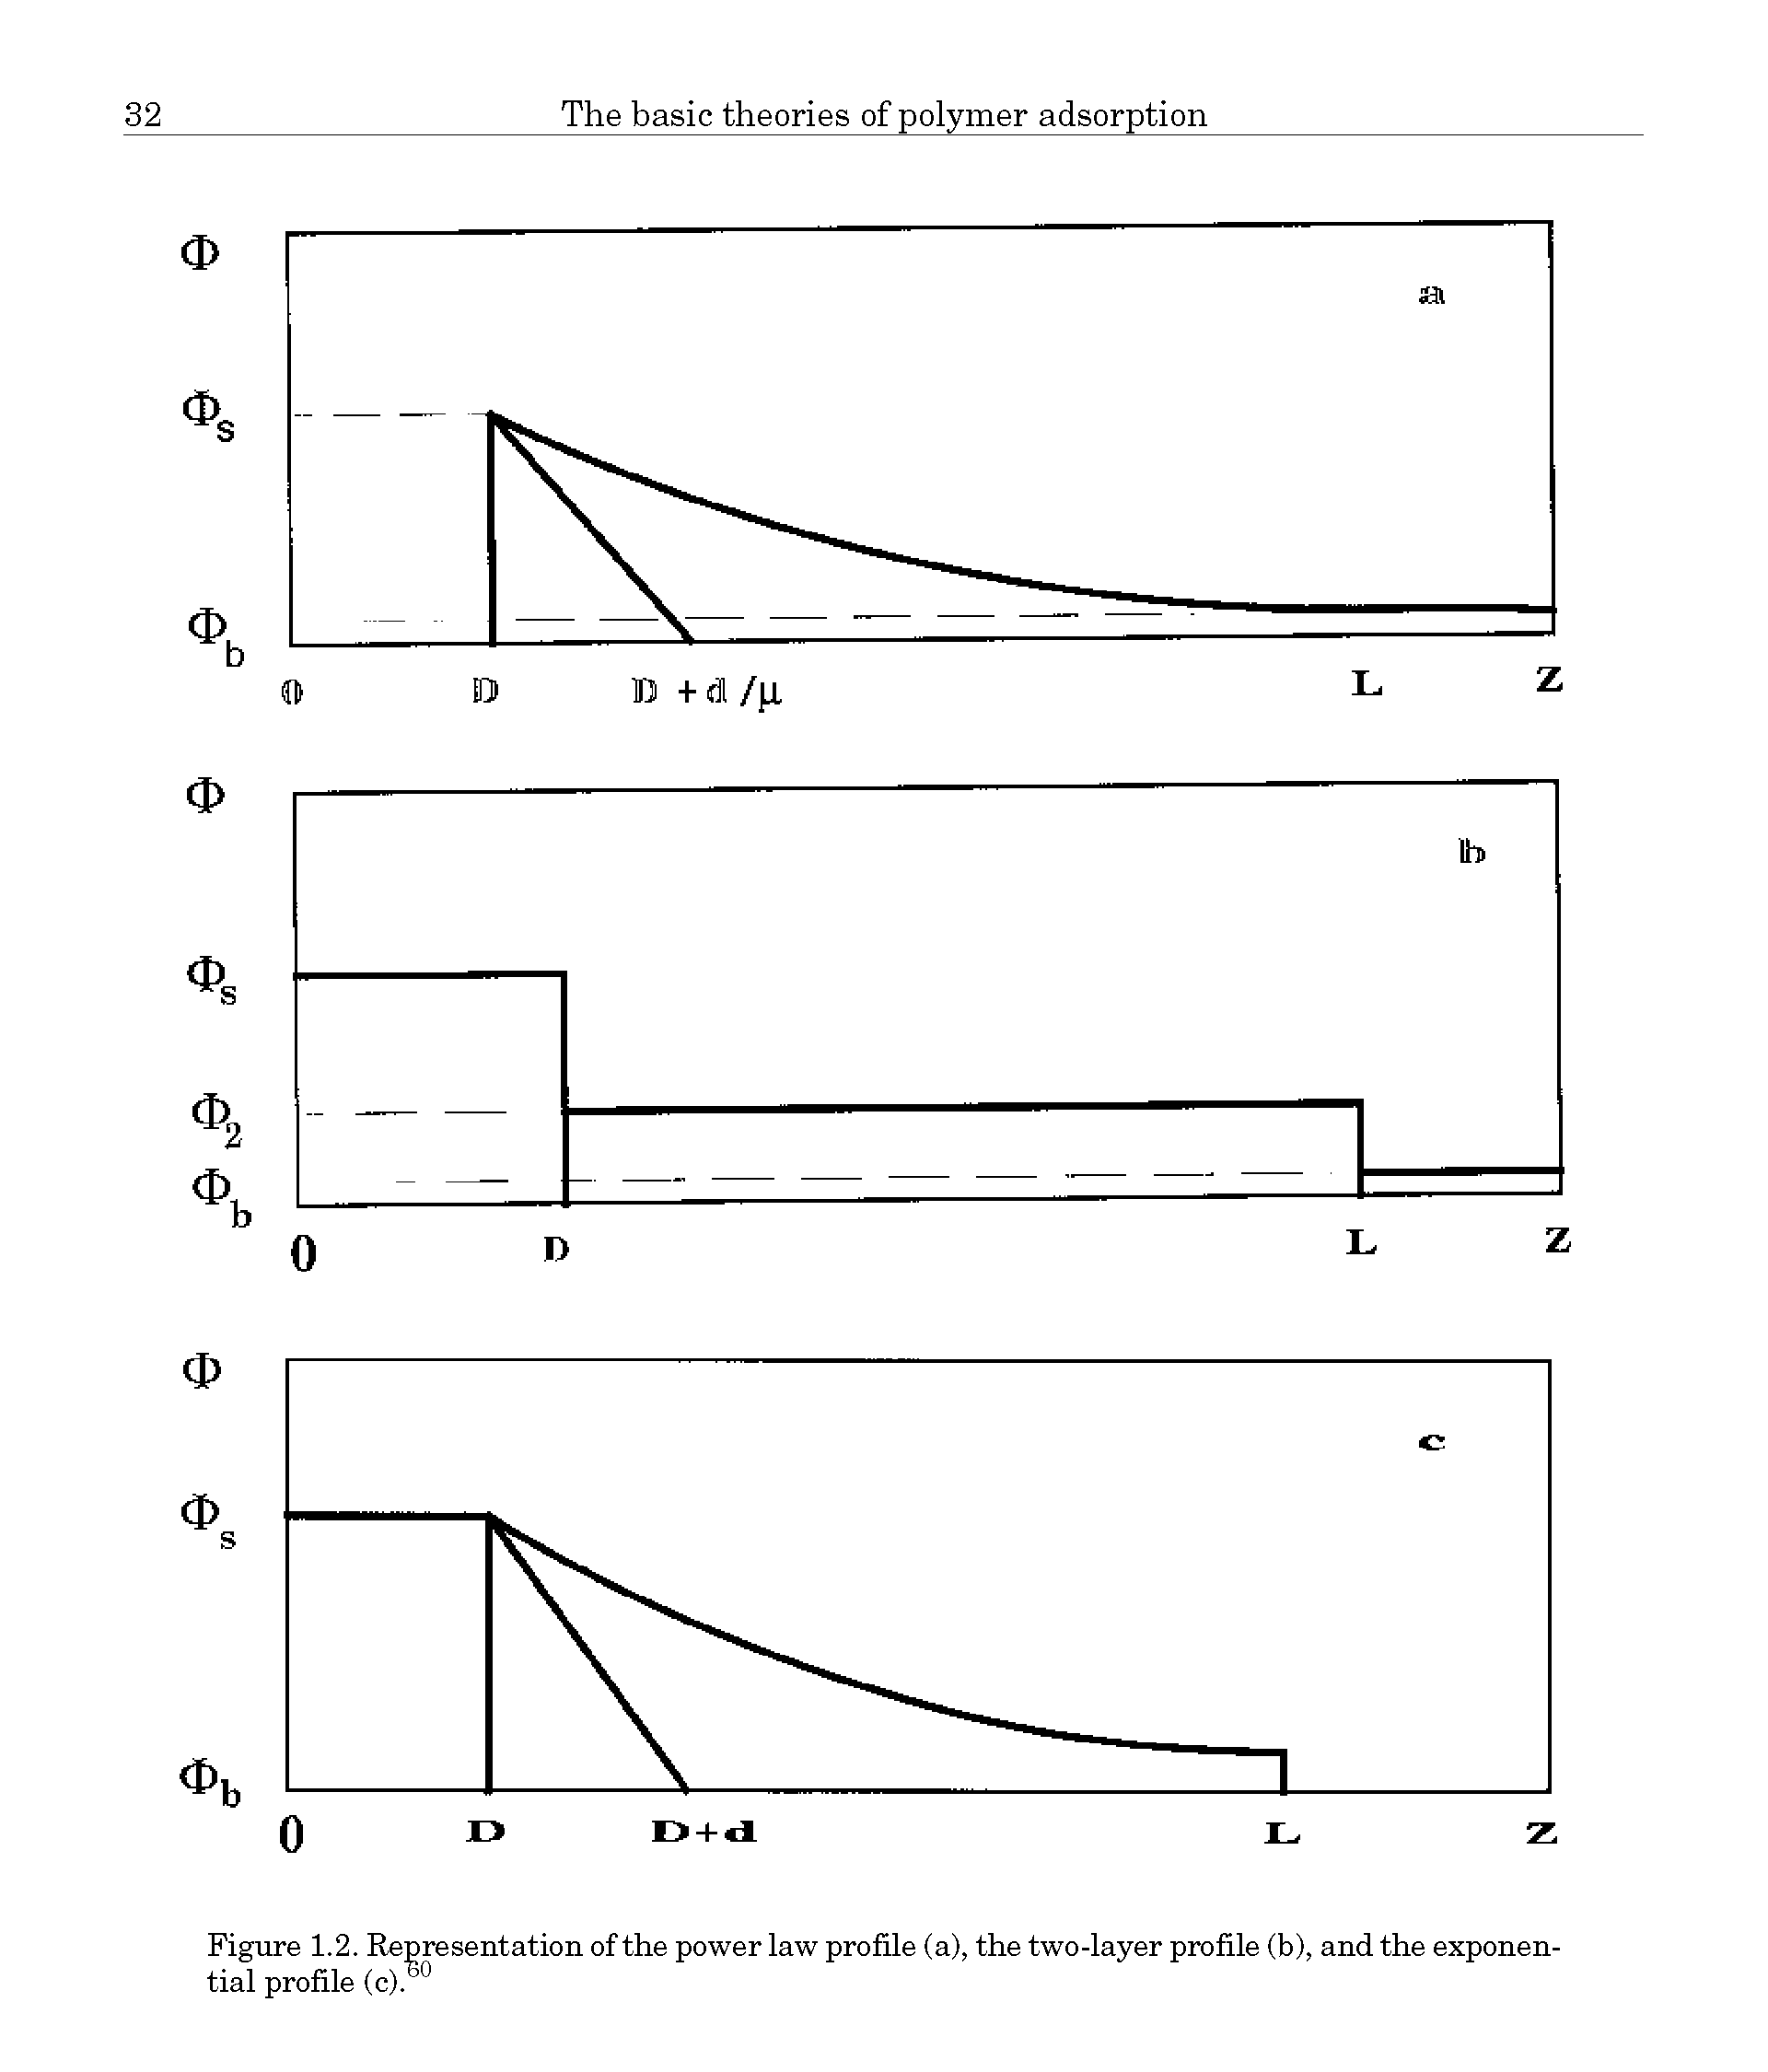 Figure 1.2. Representation of the power law profile (a), the two-layer profile (b), and the exponential profile (c). ...